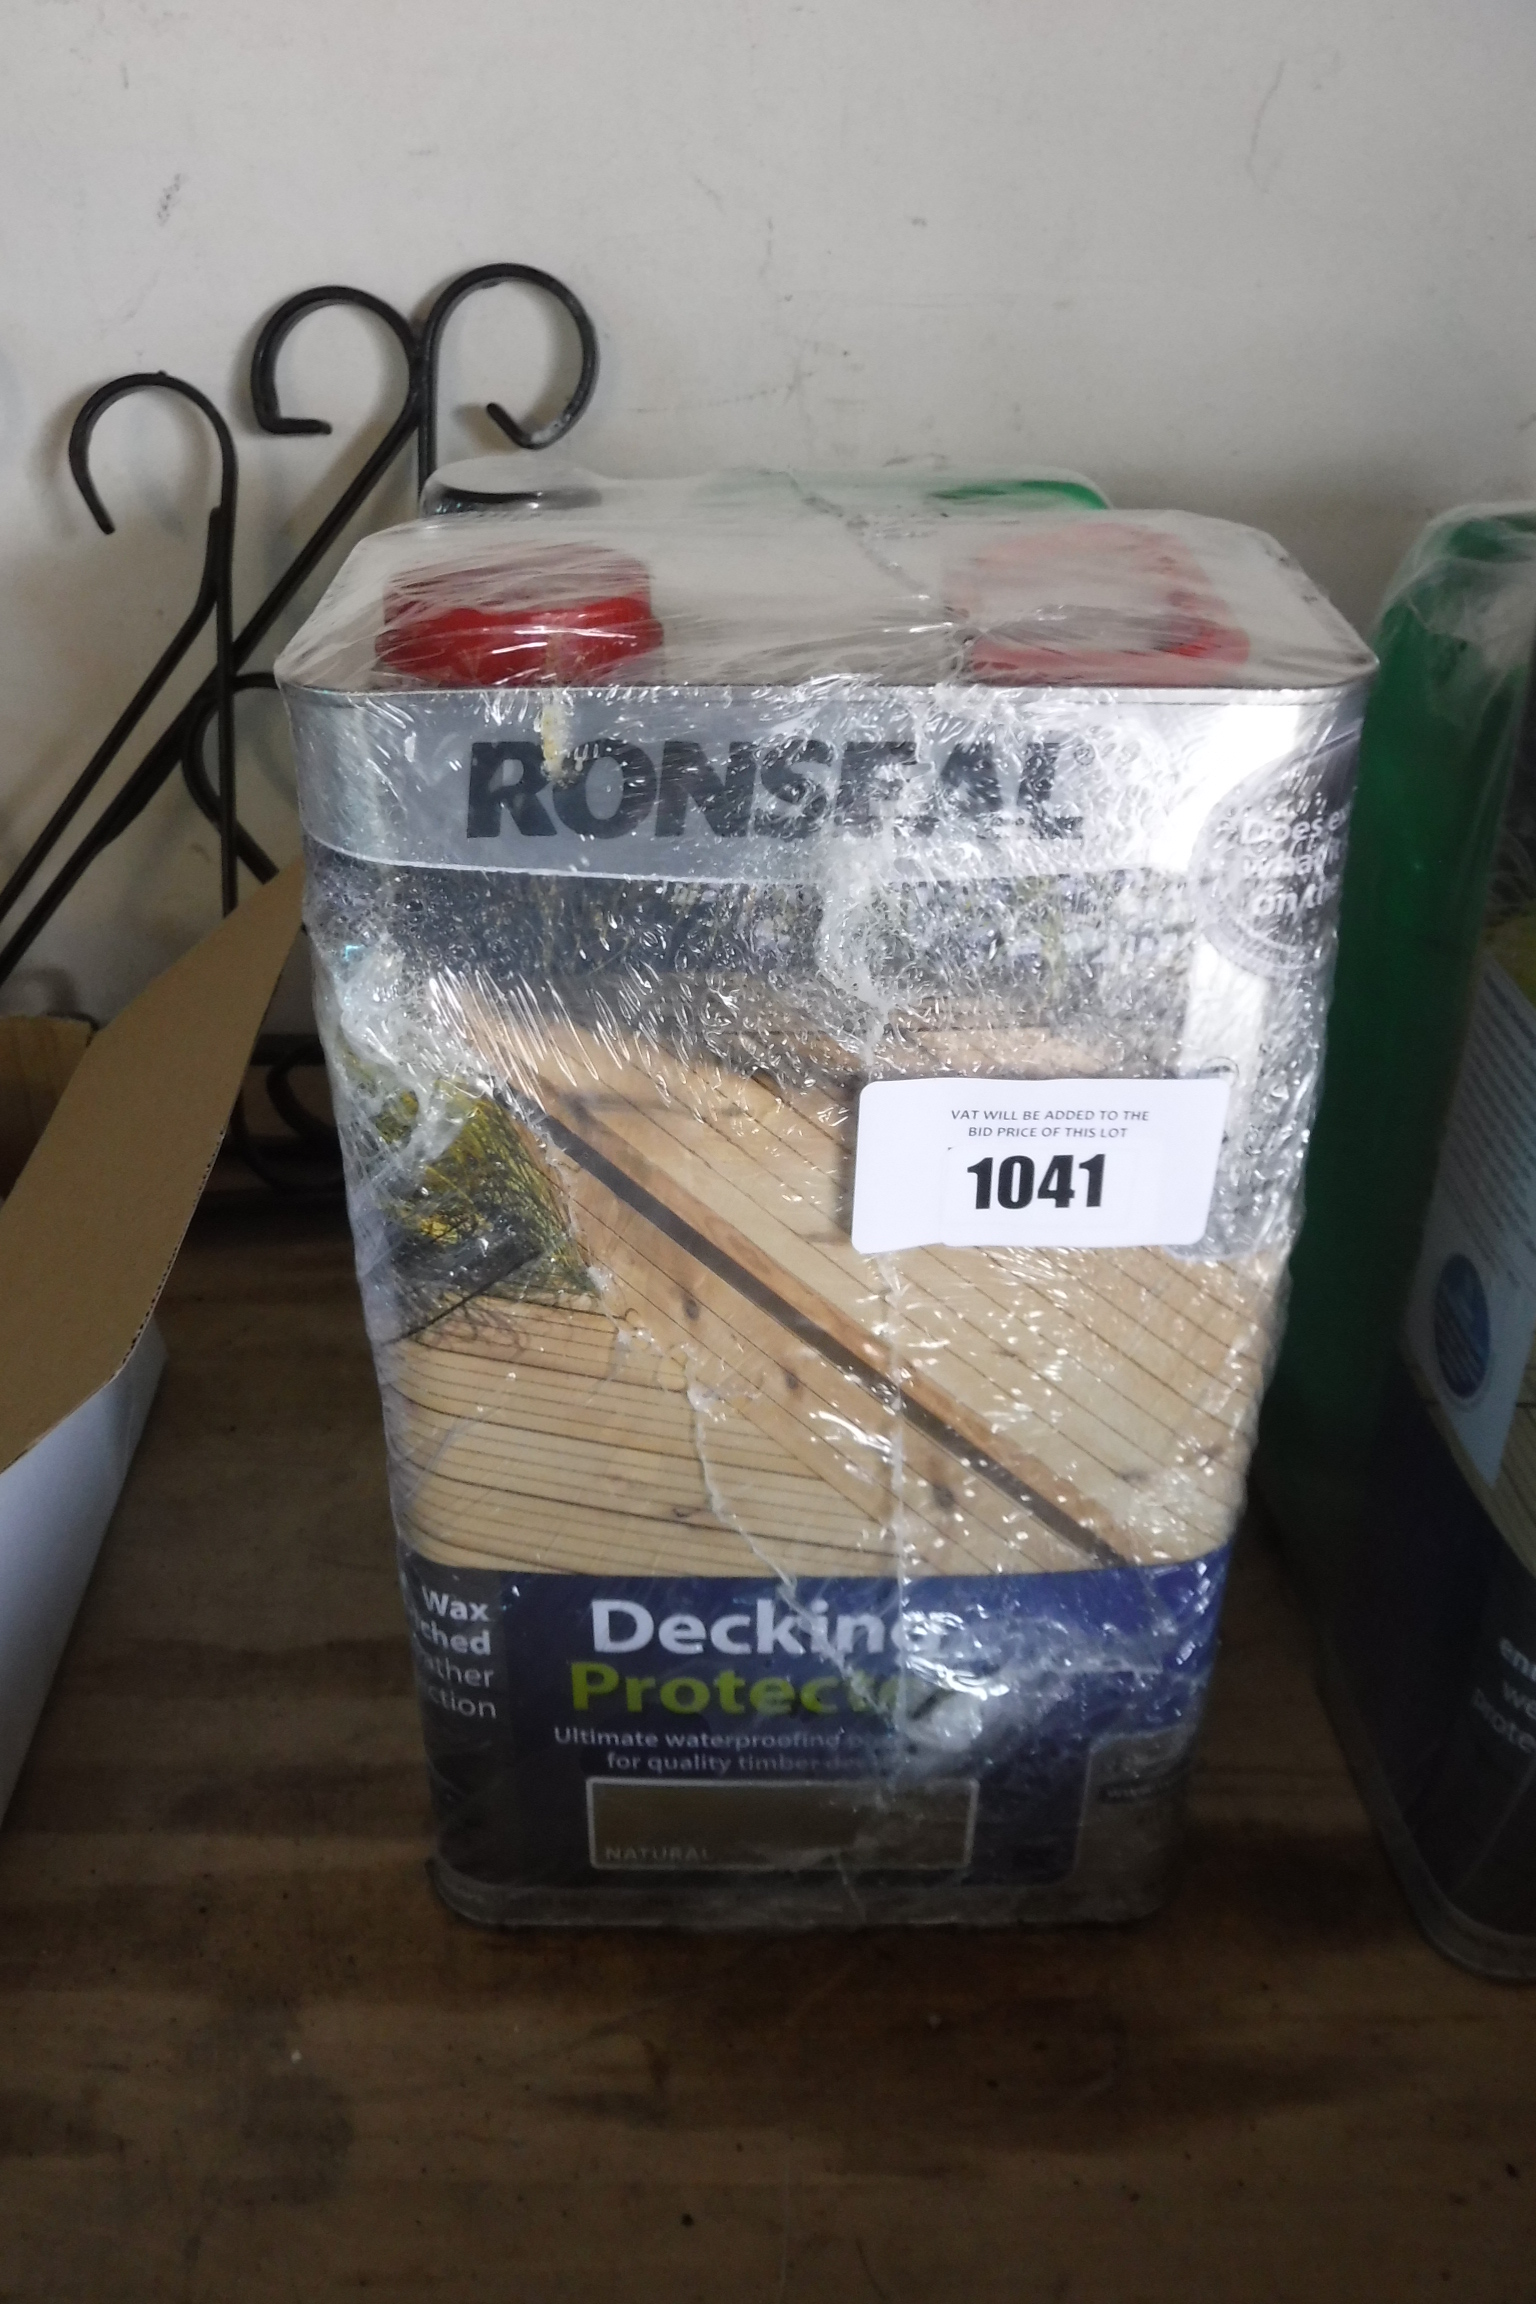 Pack of Ronseal decking protector with tub of decking cleaner and reviver